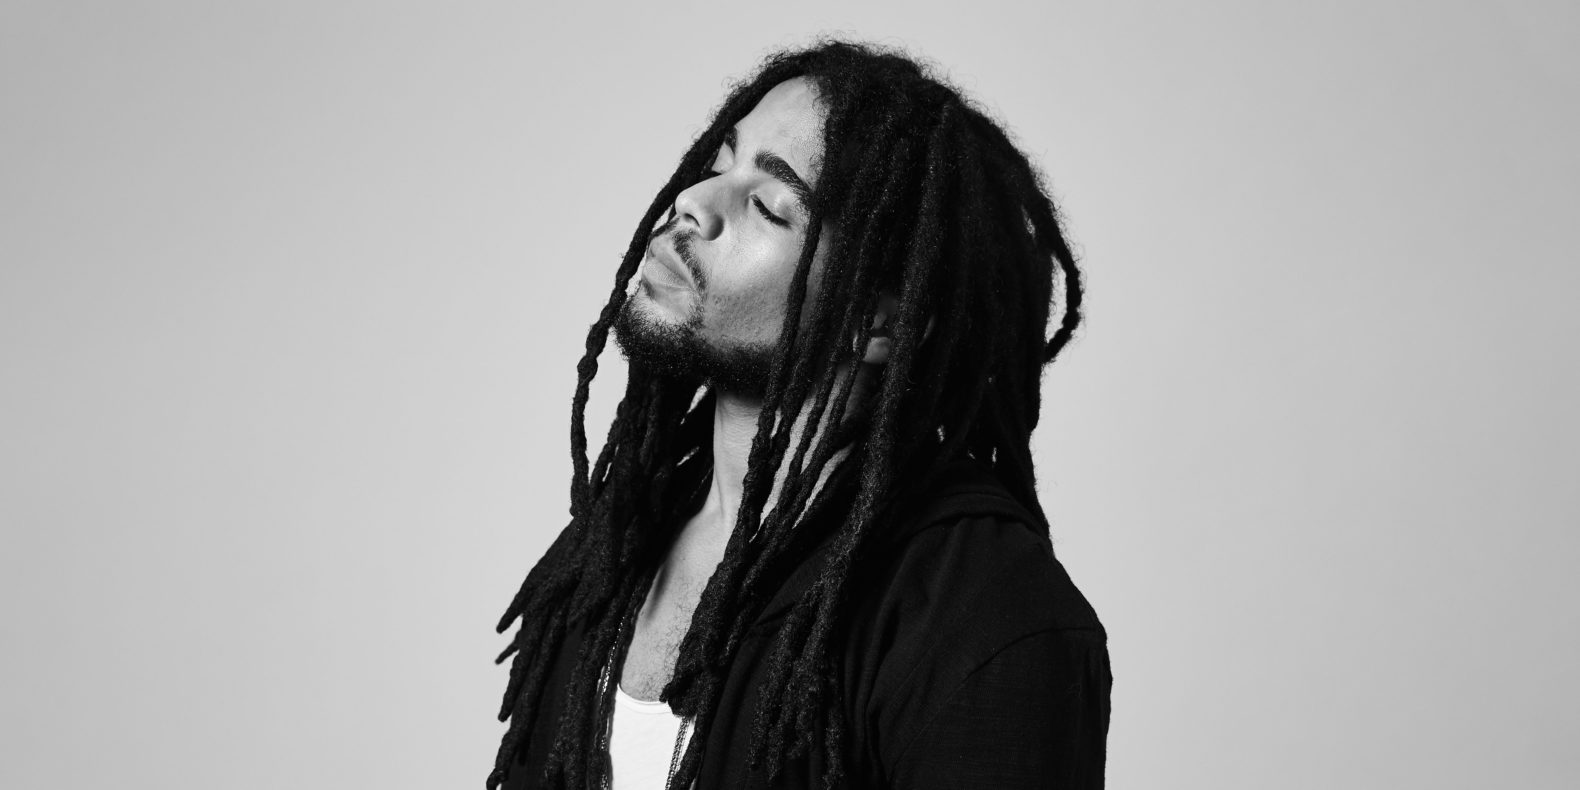 Feature image Skip Marley with Ivy Sole at MASS MoCA, black and white image of Skip Marley with eyes closed